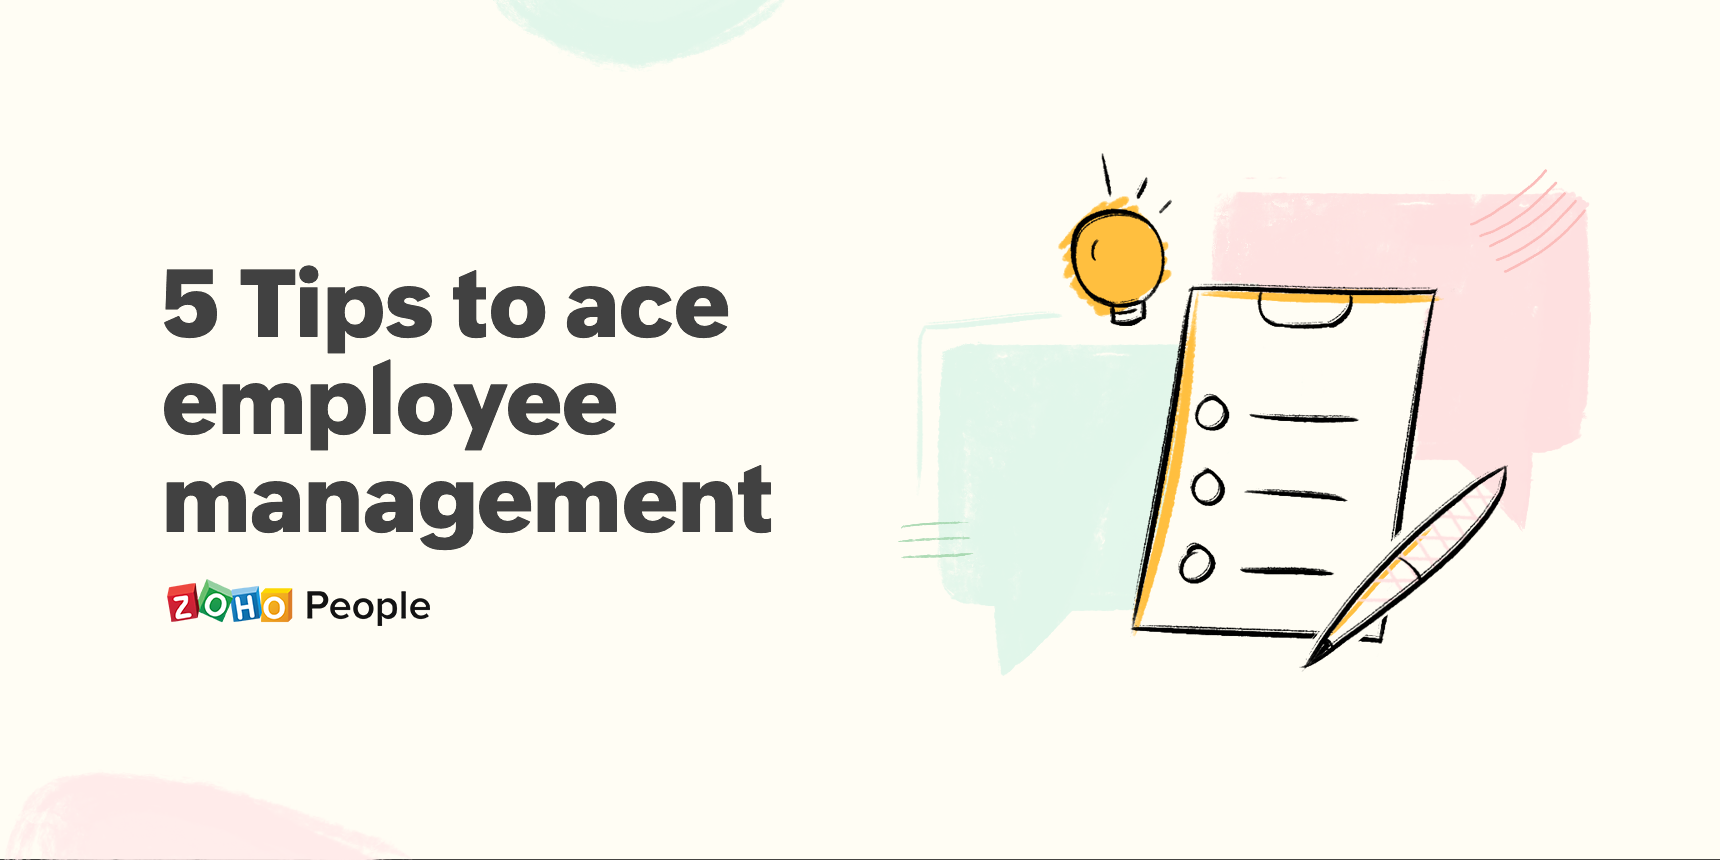 5 tips to ace employee management